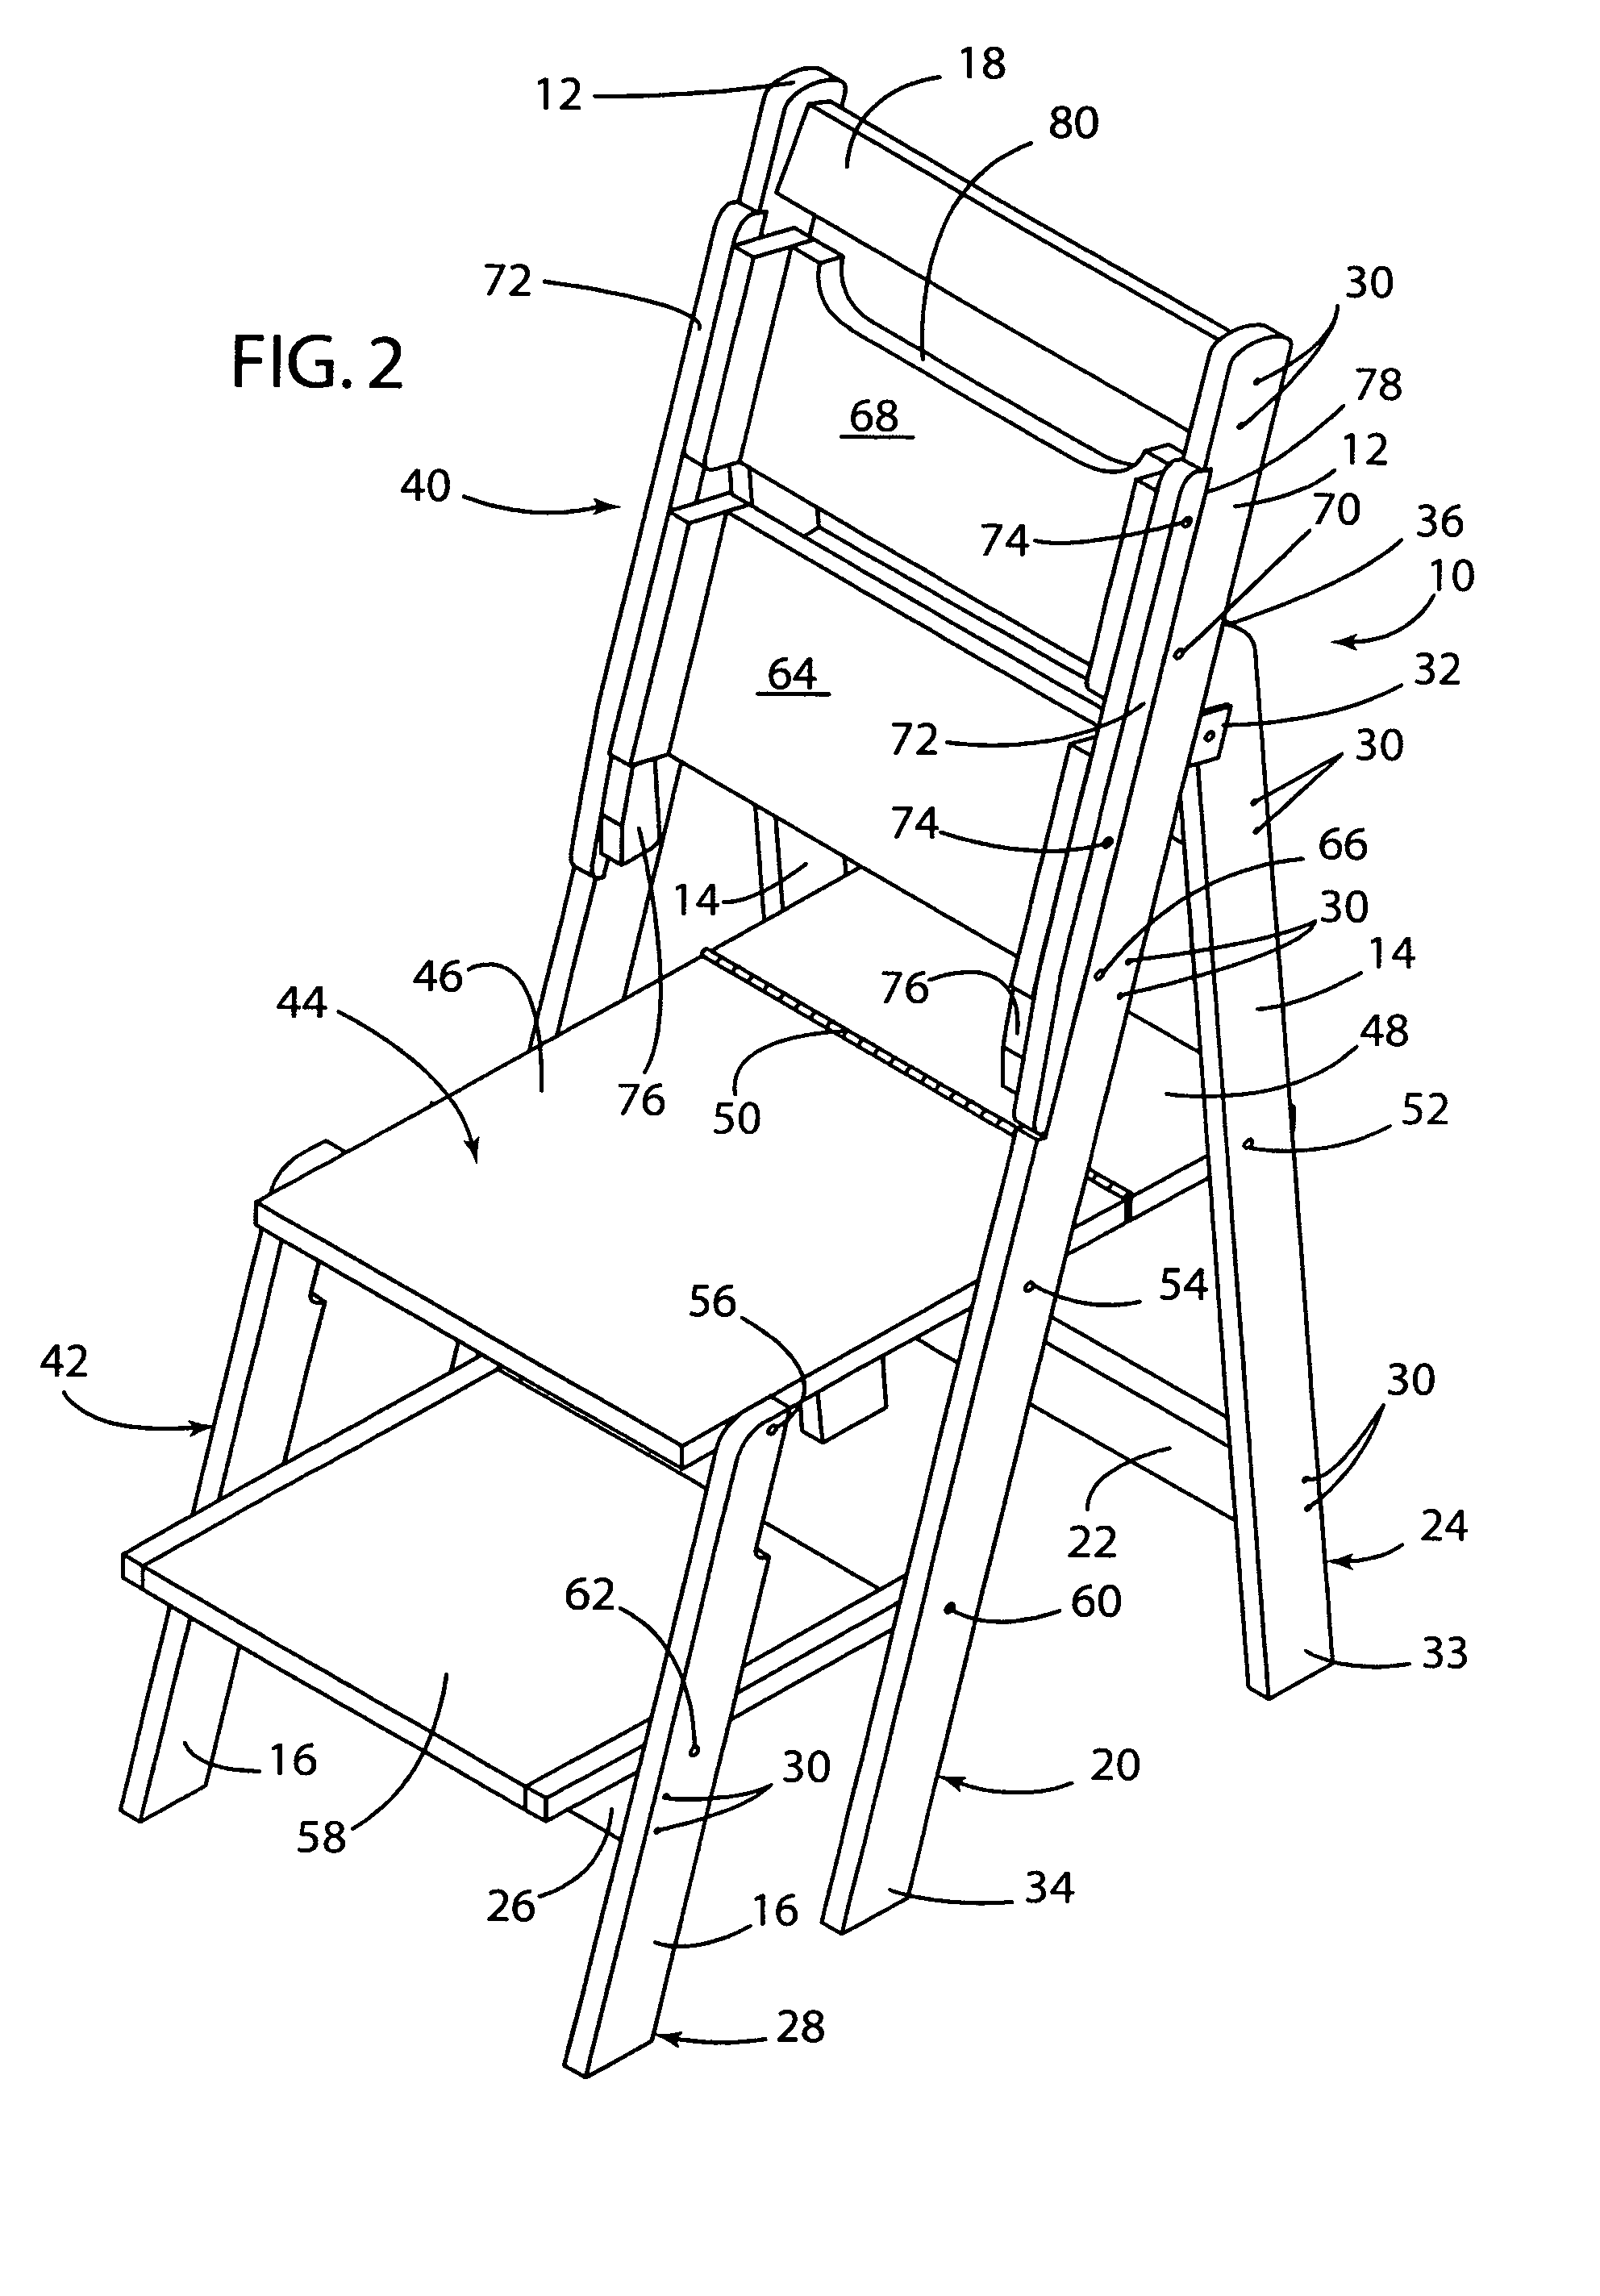 Foldable chair and ladder combination